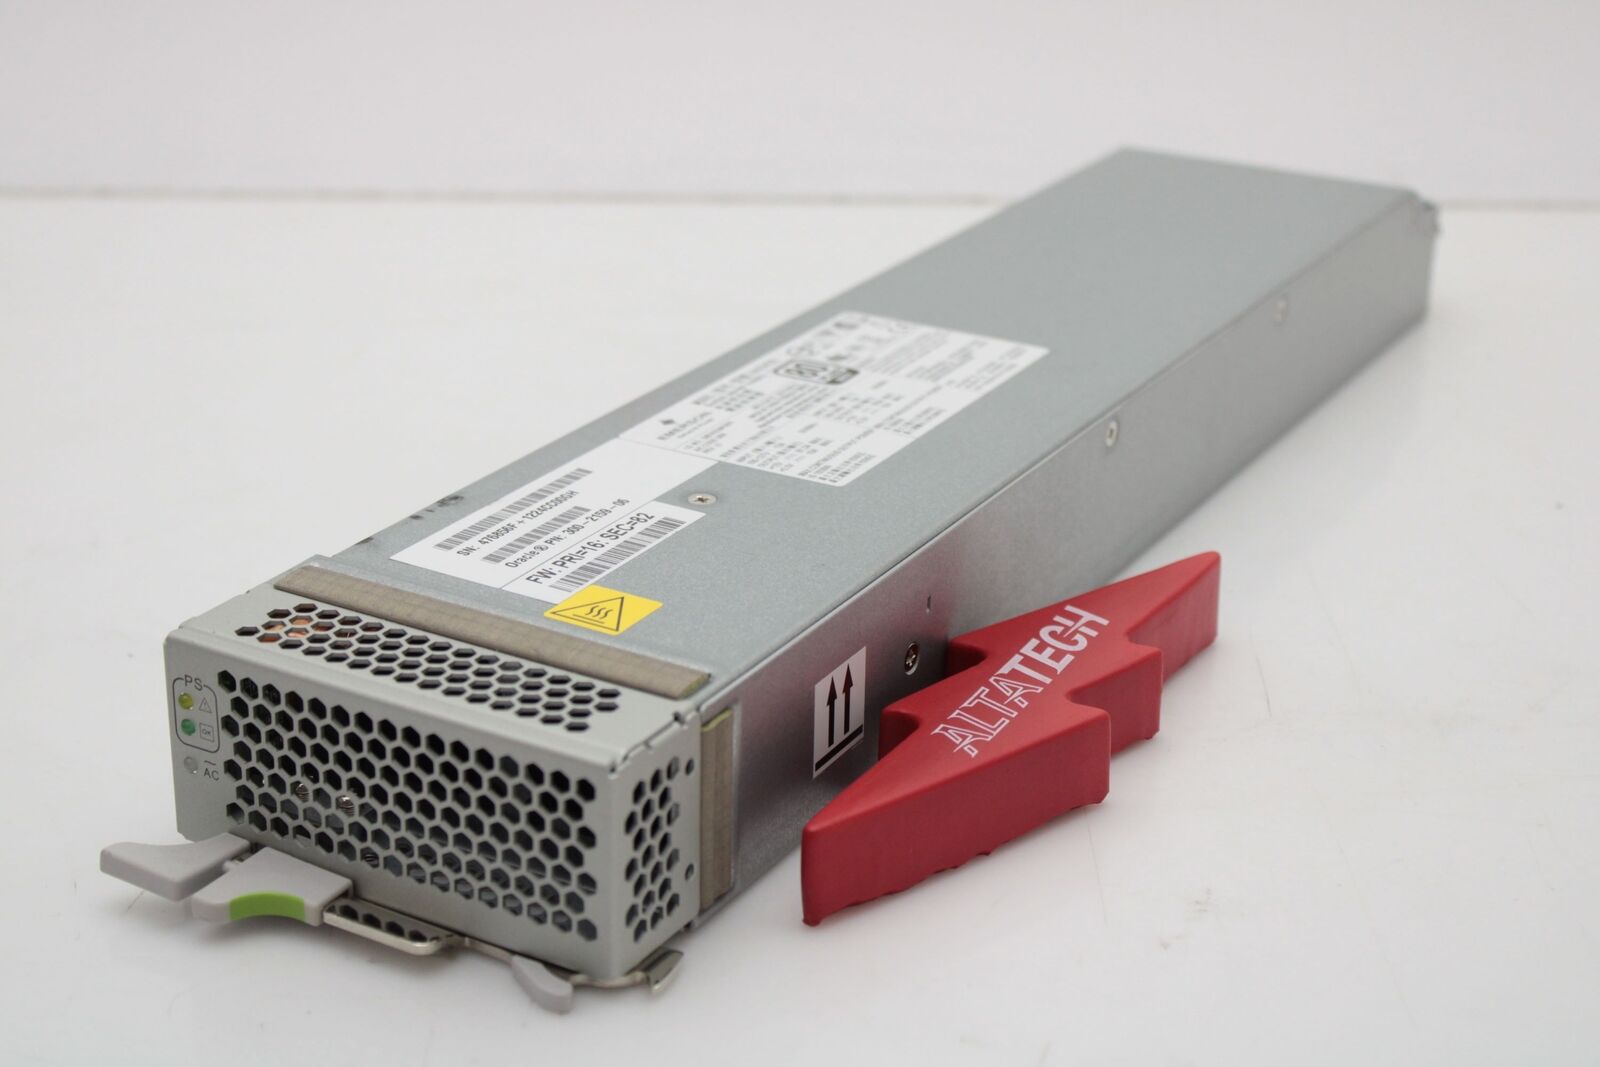 SUN Oracle 300-2159 A239 1030/2060W AC Power Supply Unit, PSU for SPARC T4-4